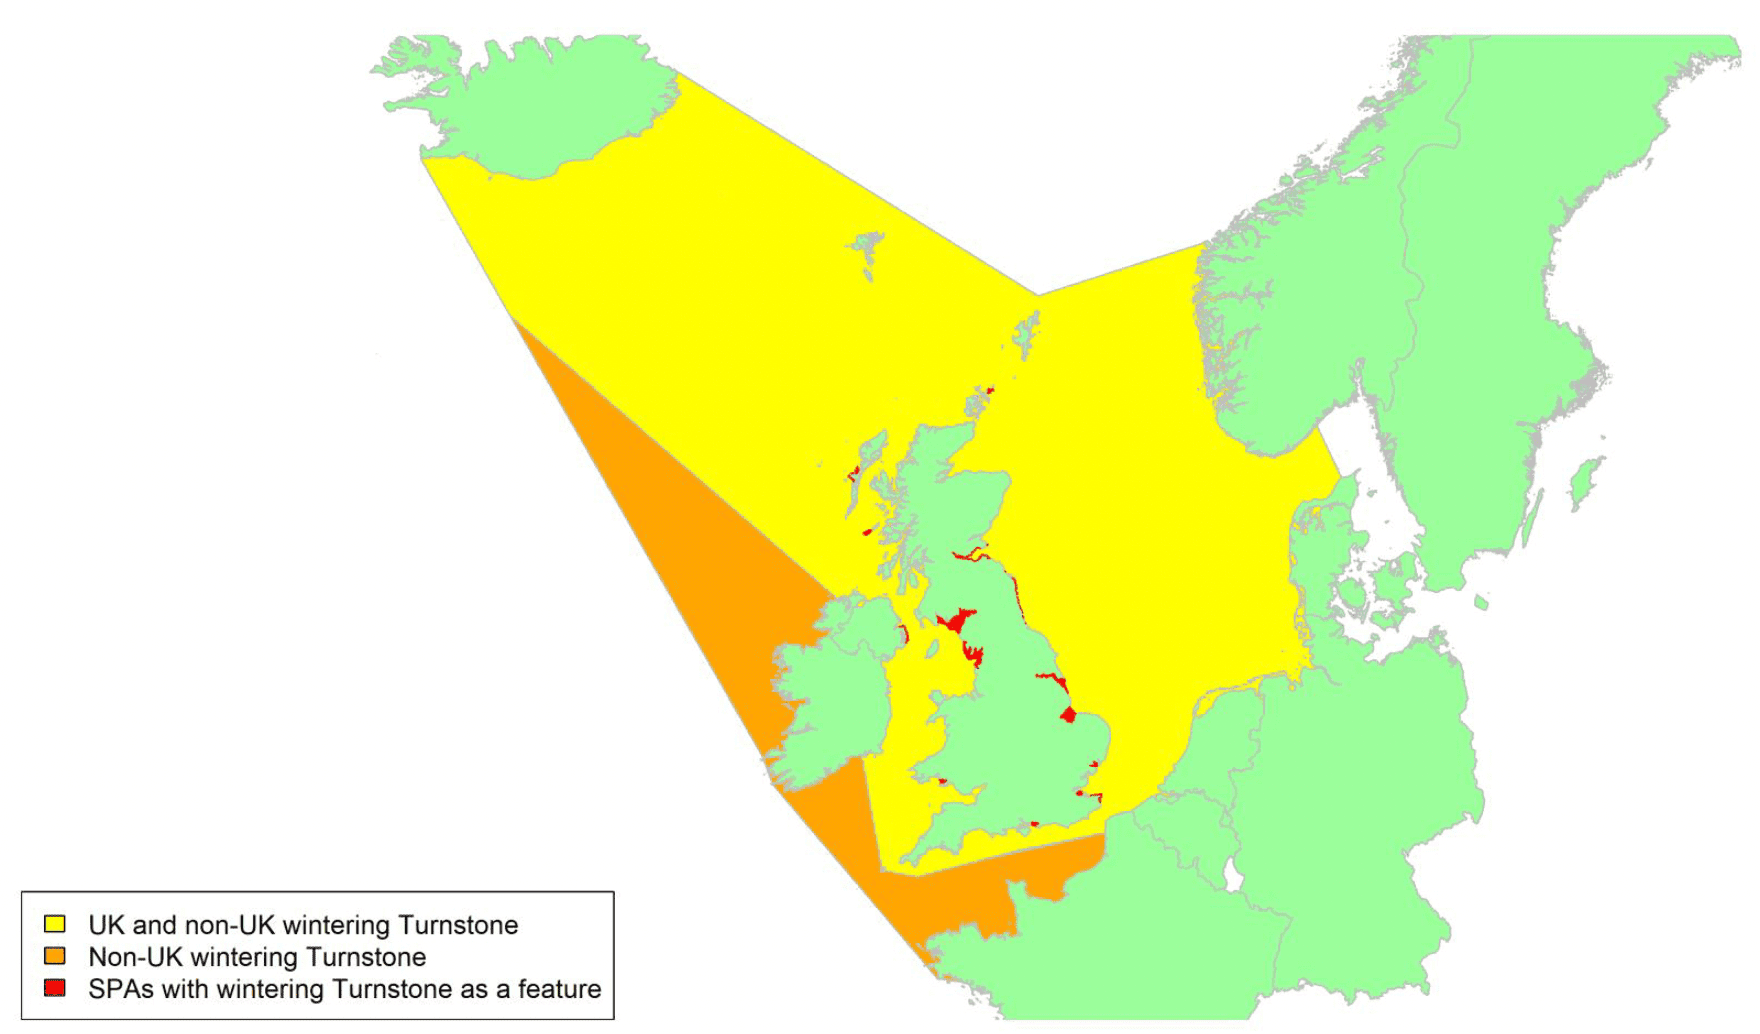 Map of North West Europe showing migratory routes and SPAs within the UK for Turnstone as described in the text below.